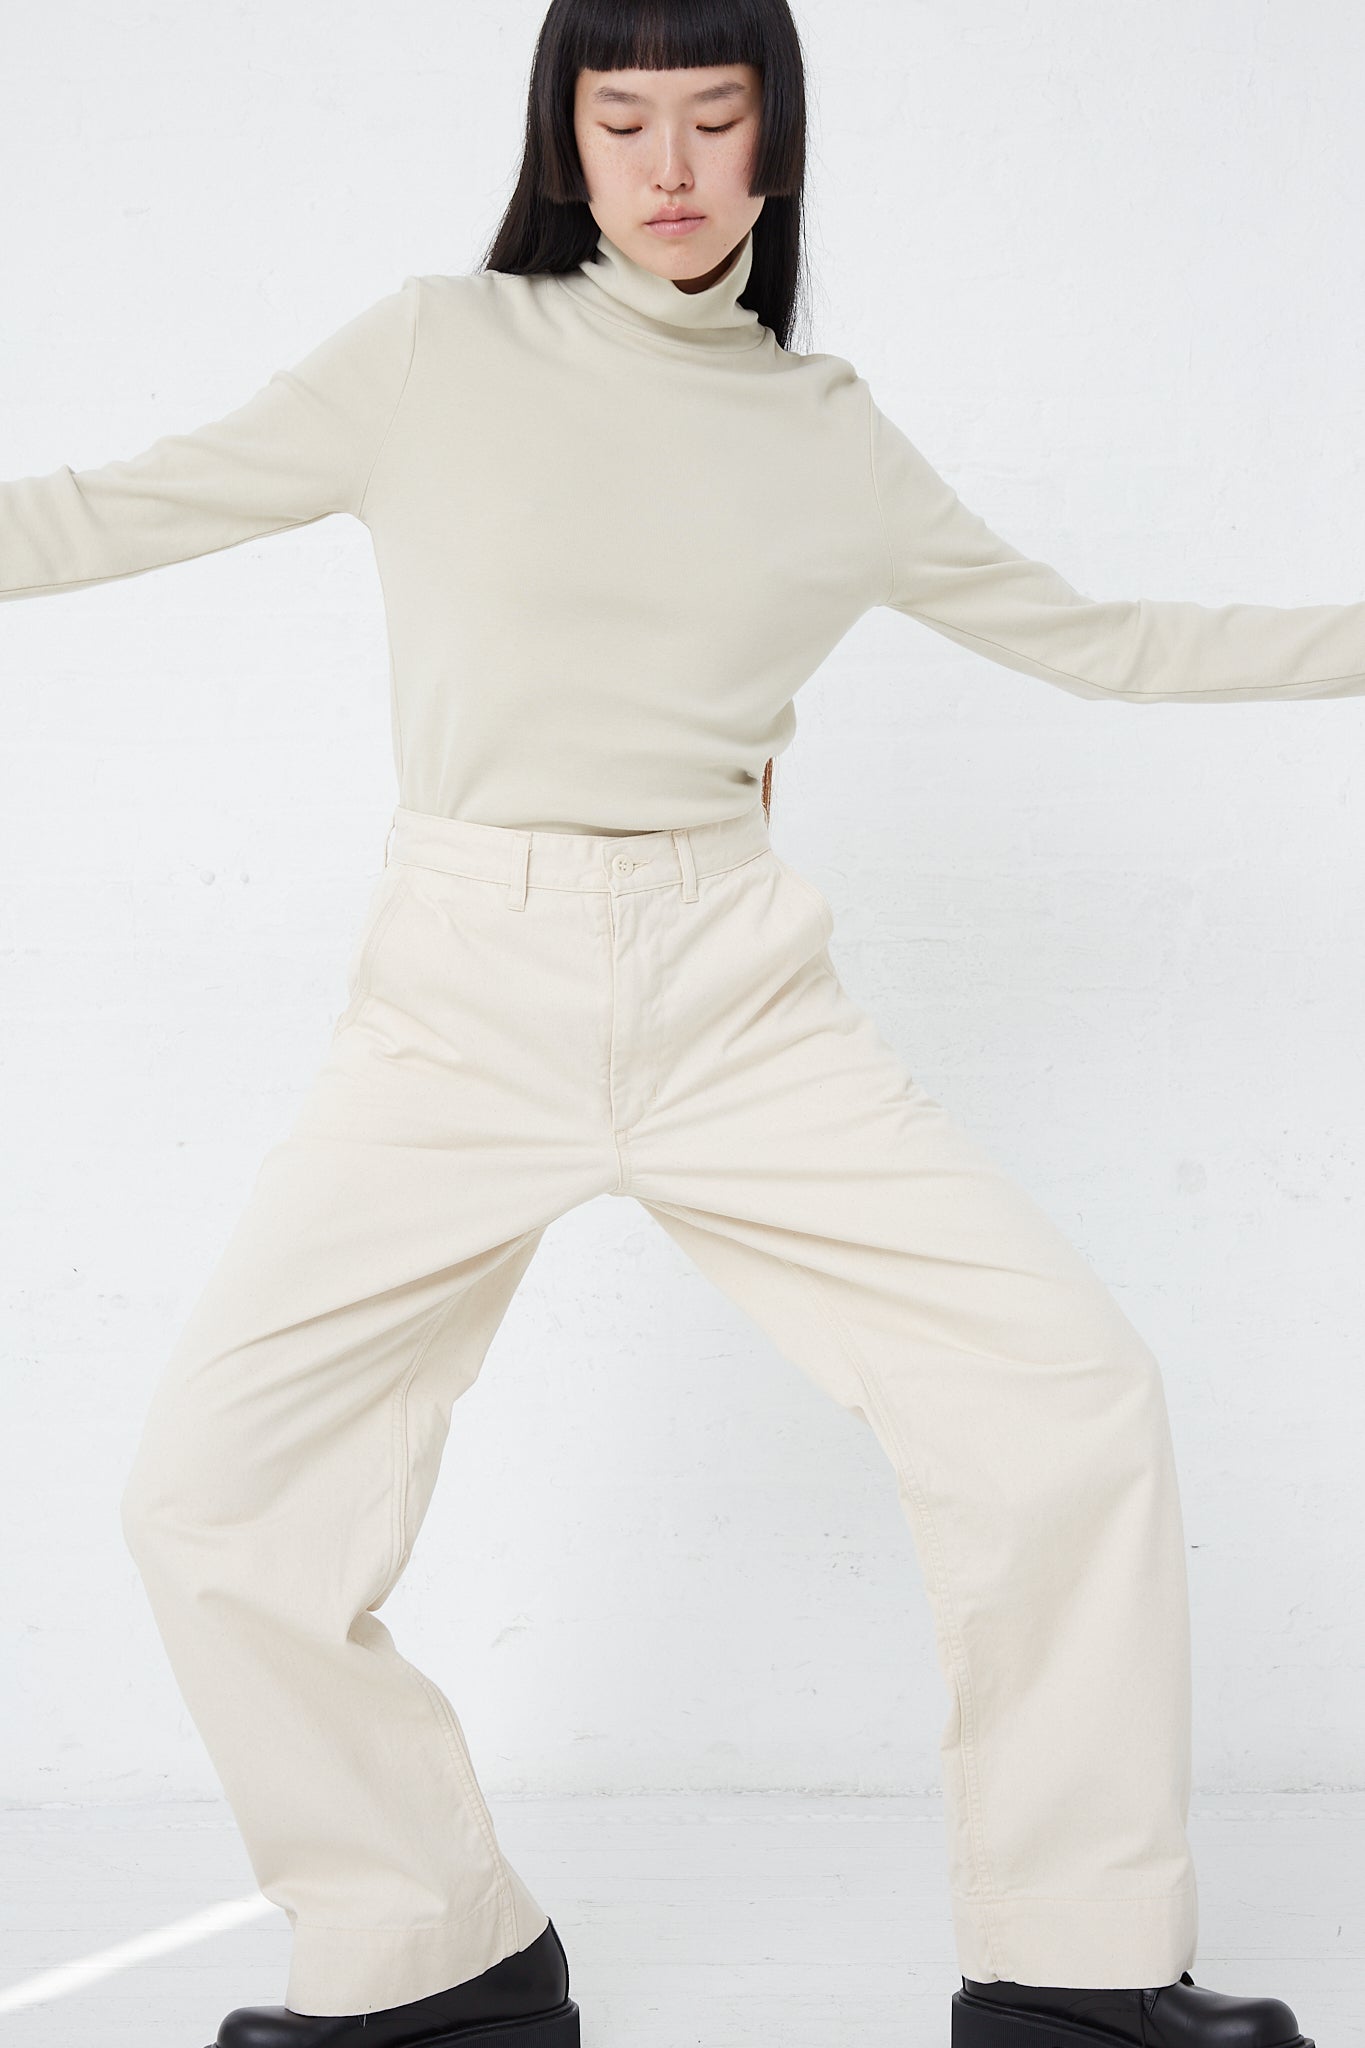 A woman wearing As Ever's 51 Chino in Natural pants with a turtleneck.